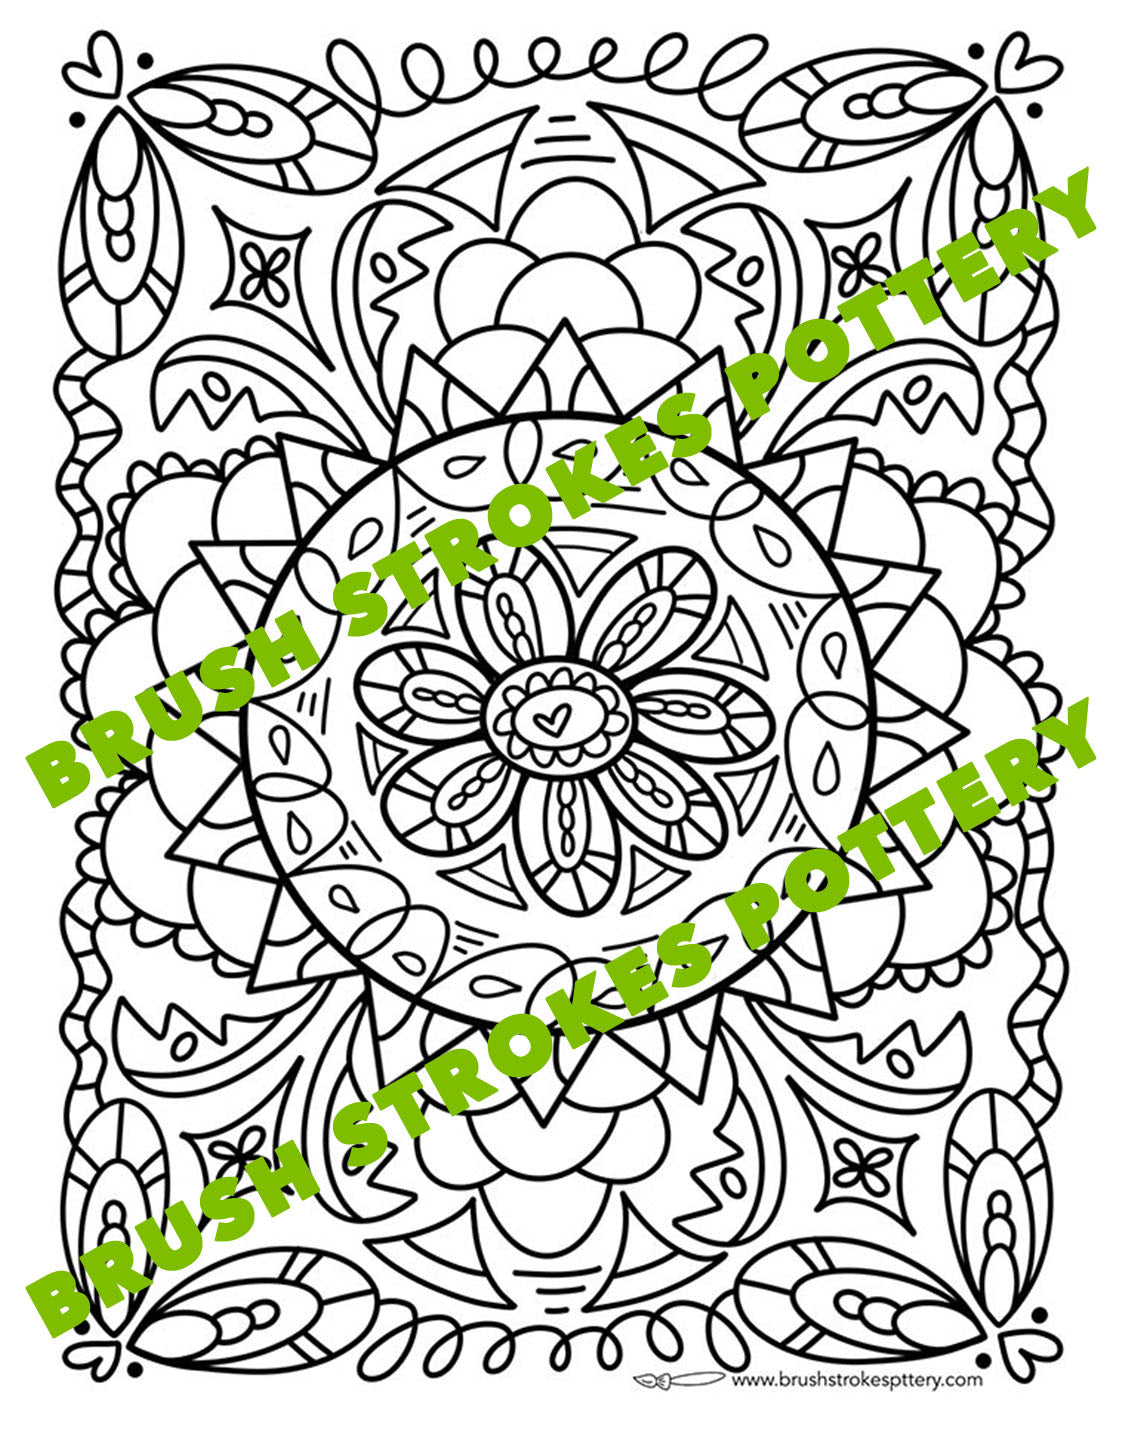 Grown up coloring page â brush strokes pottery